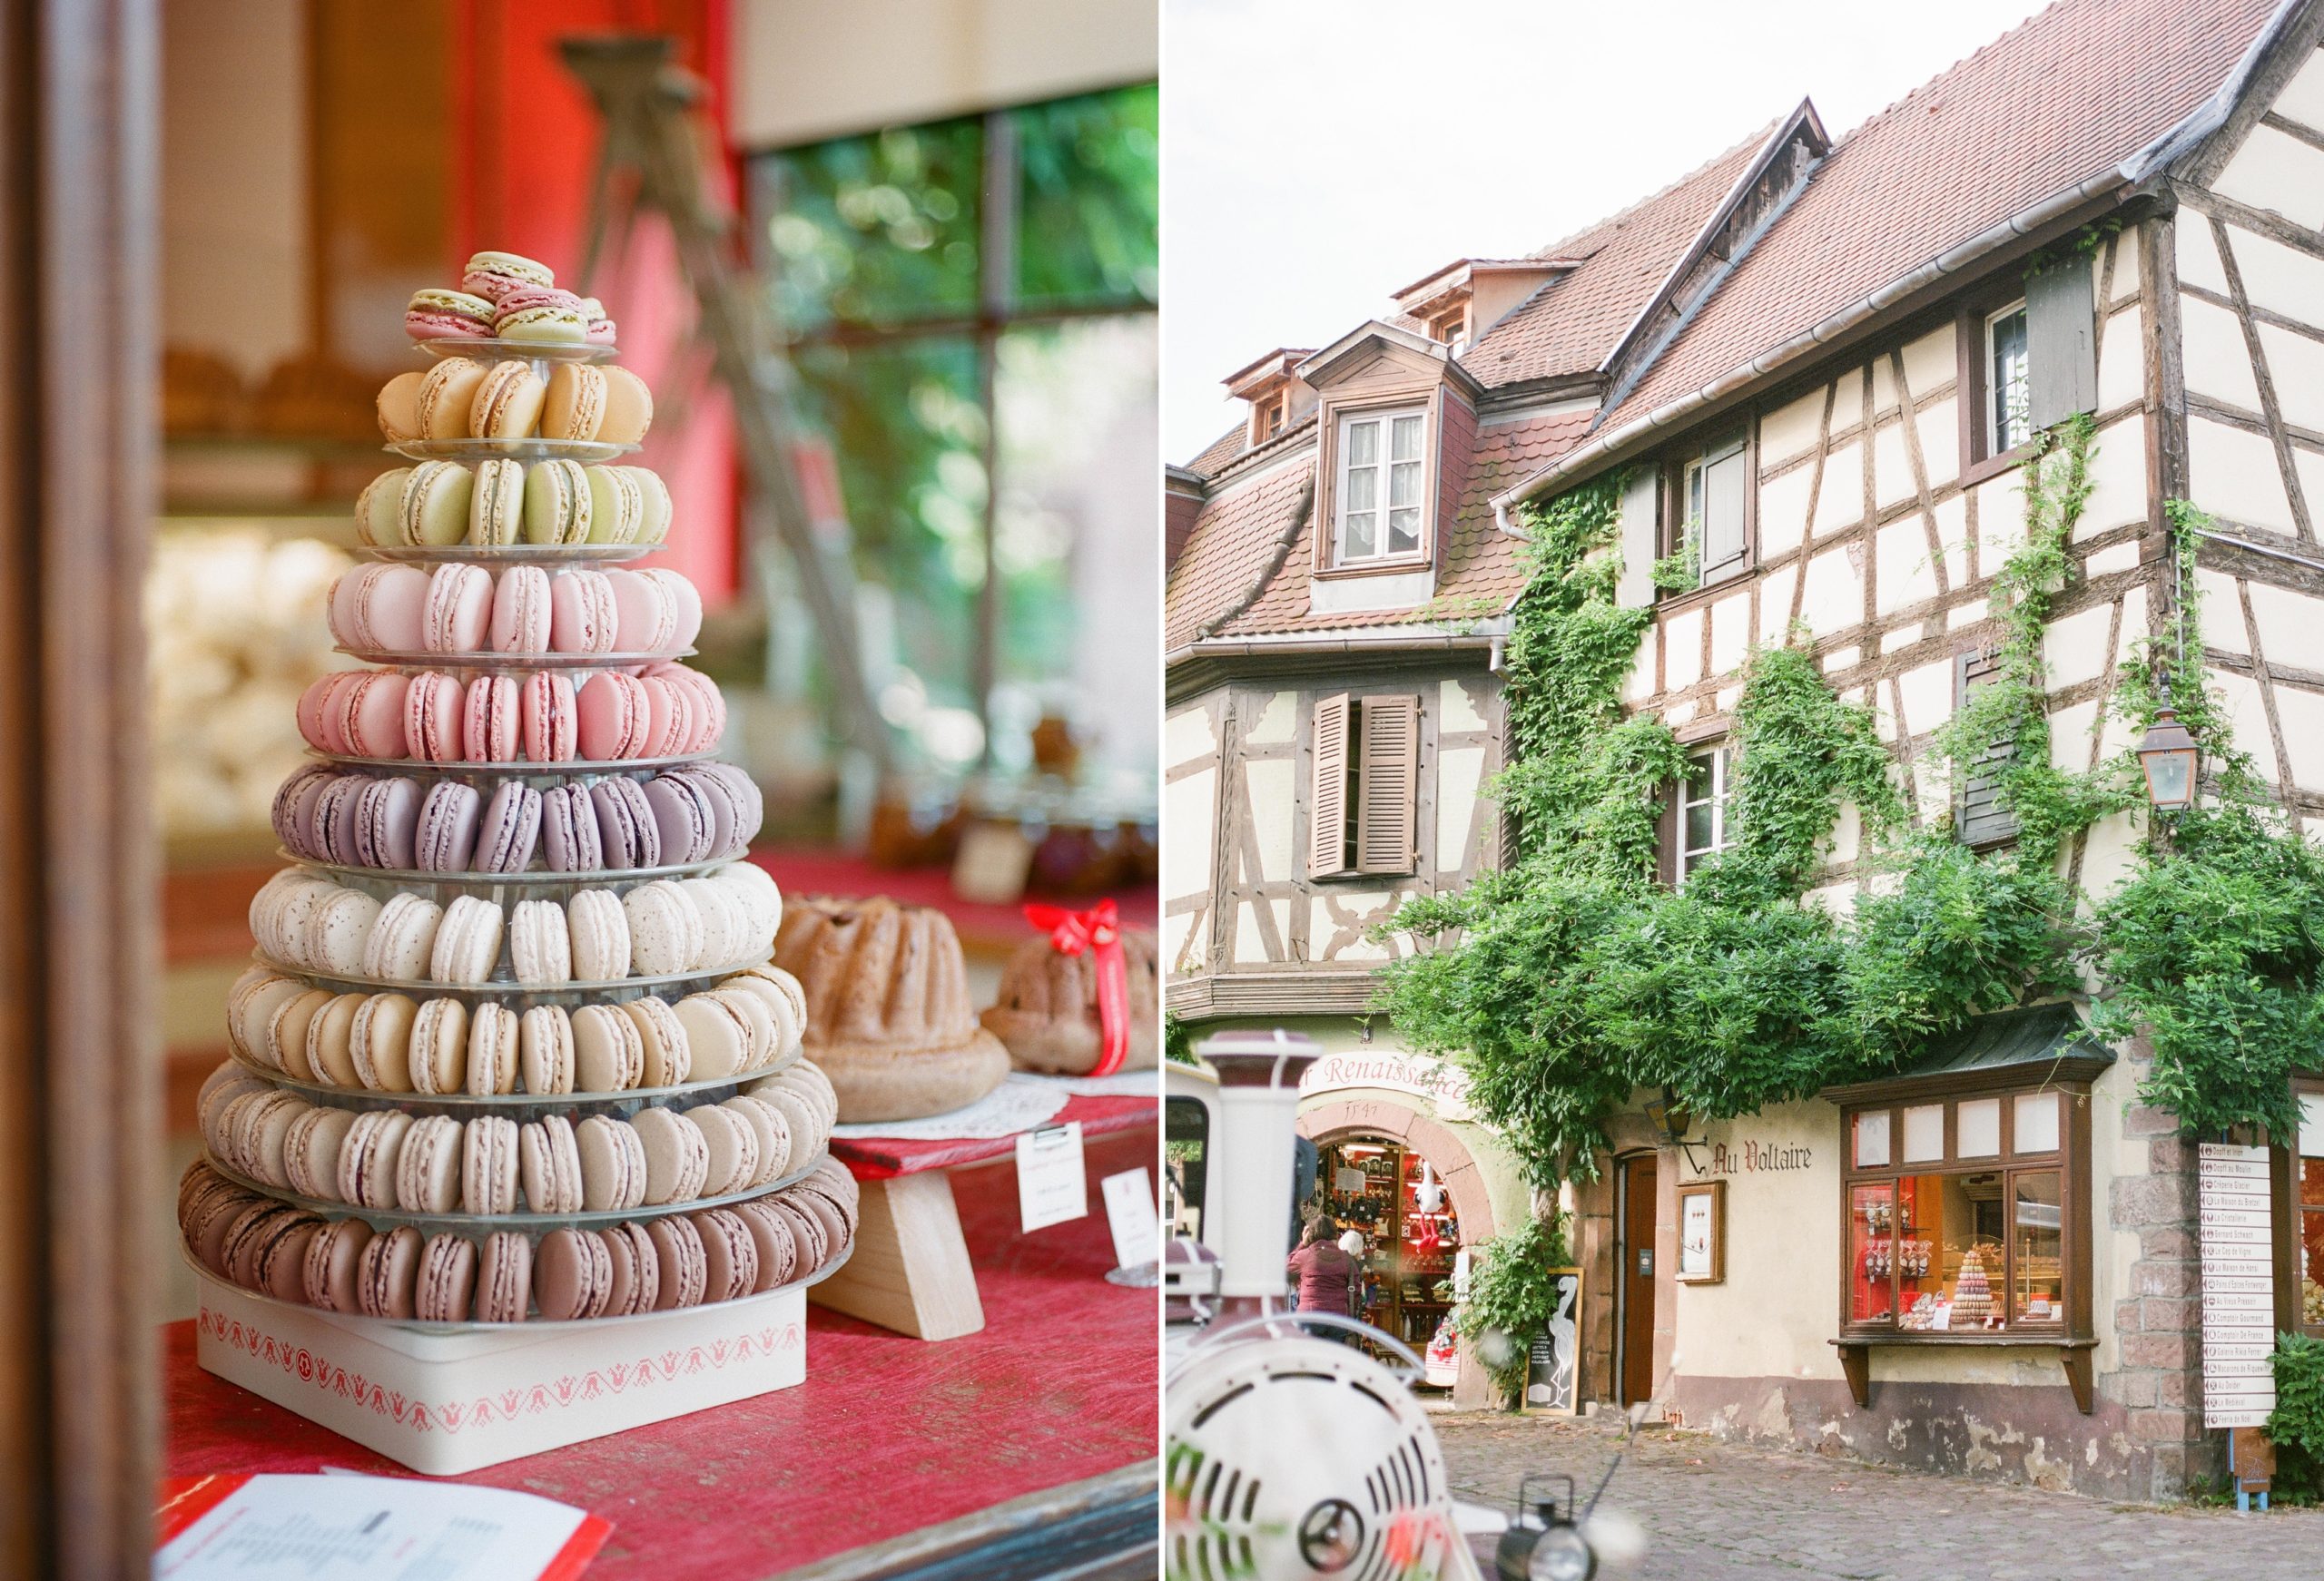 Washington, DC wedding photographer, Alicia Lacey, shares photos of her travels to Alsace, France and Zermatt, Switzerland. 